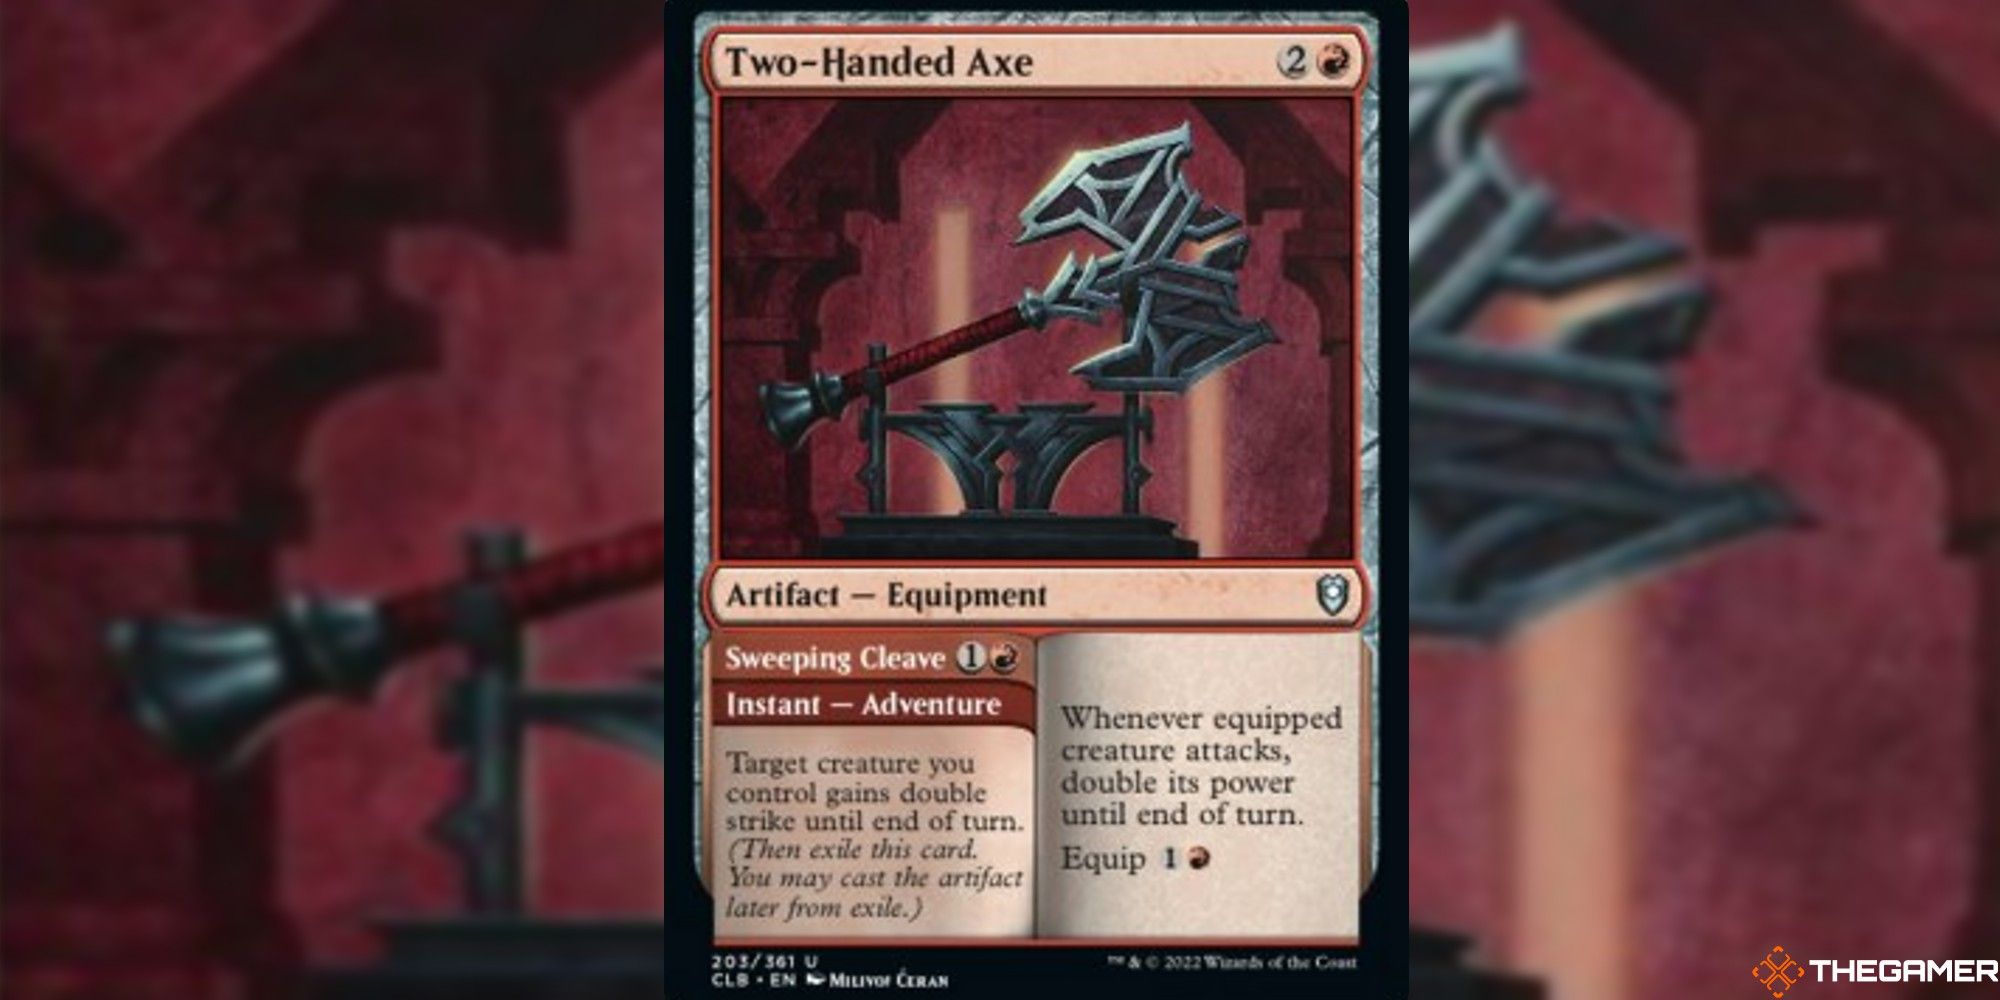 mtg two-handed axe full card with art background